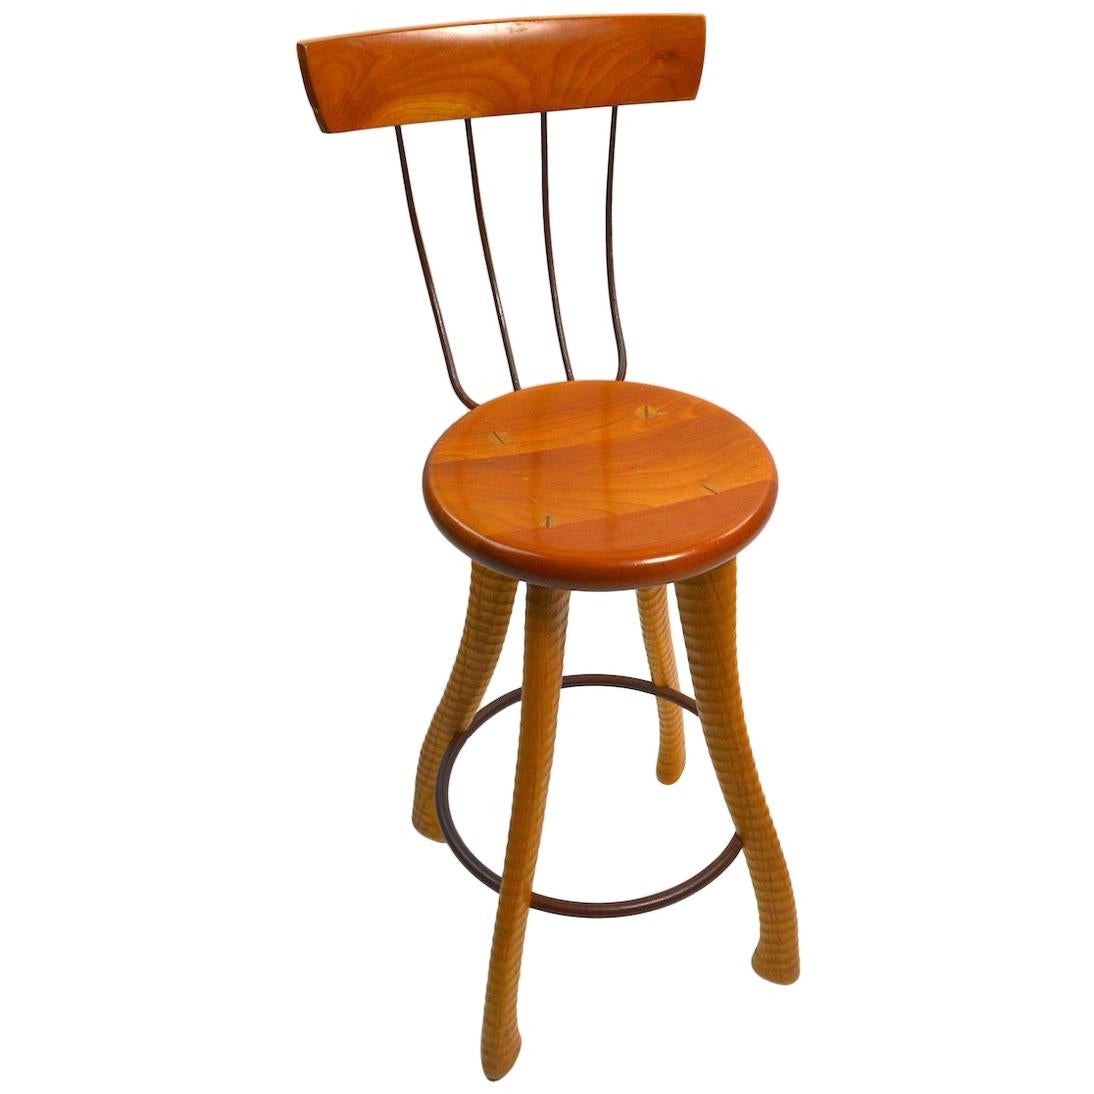 Ax Handle Stool by Brad Smith with Pitch Fork Backrest